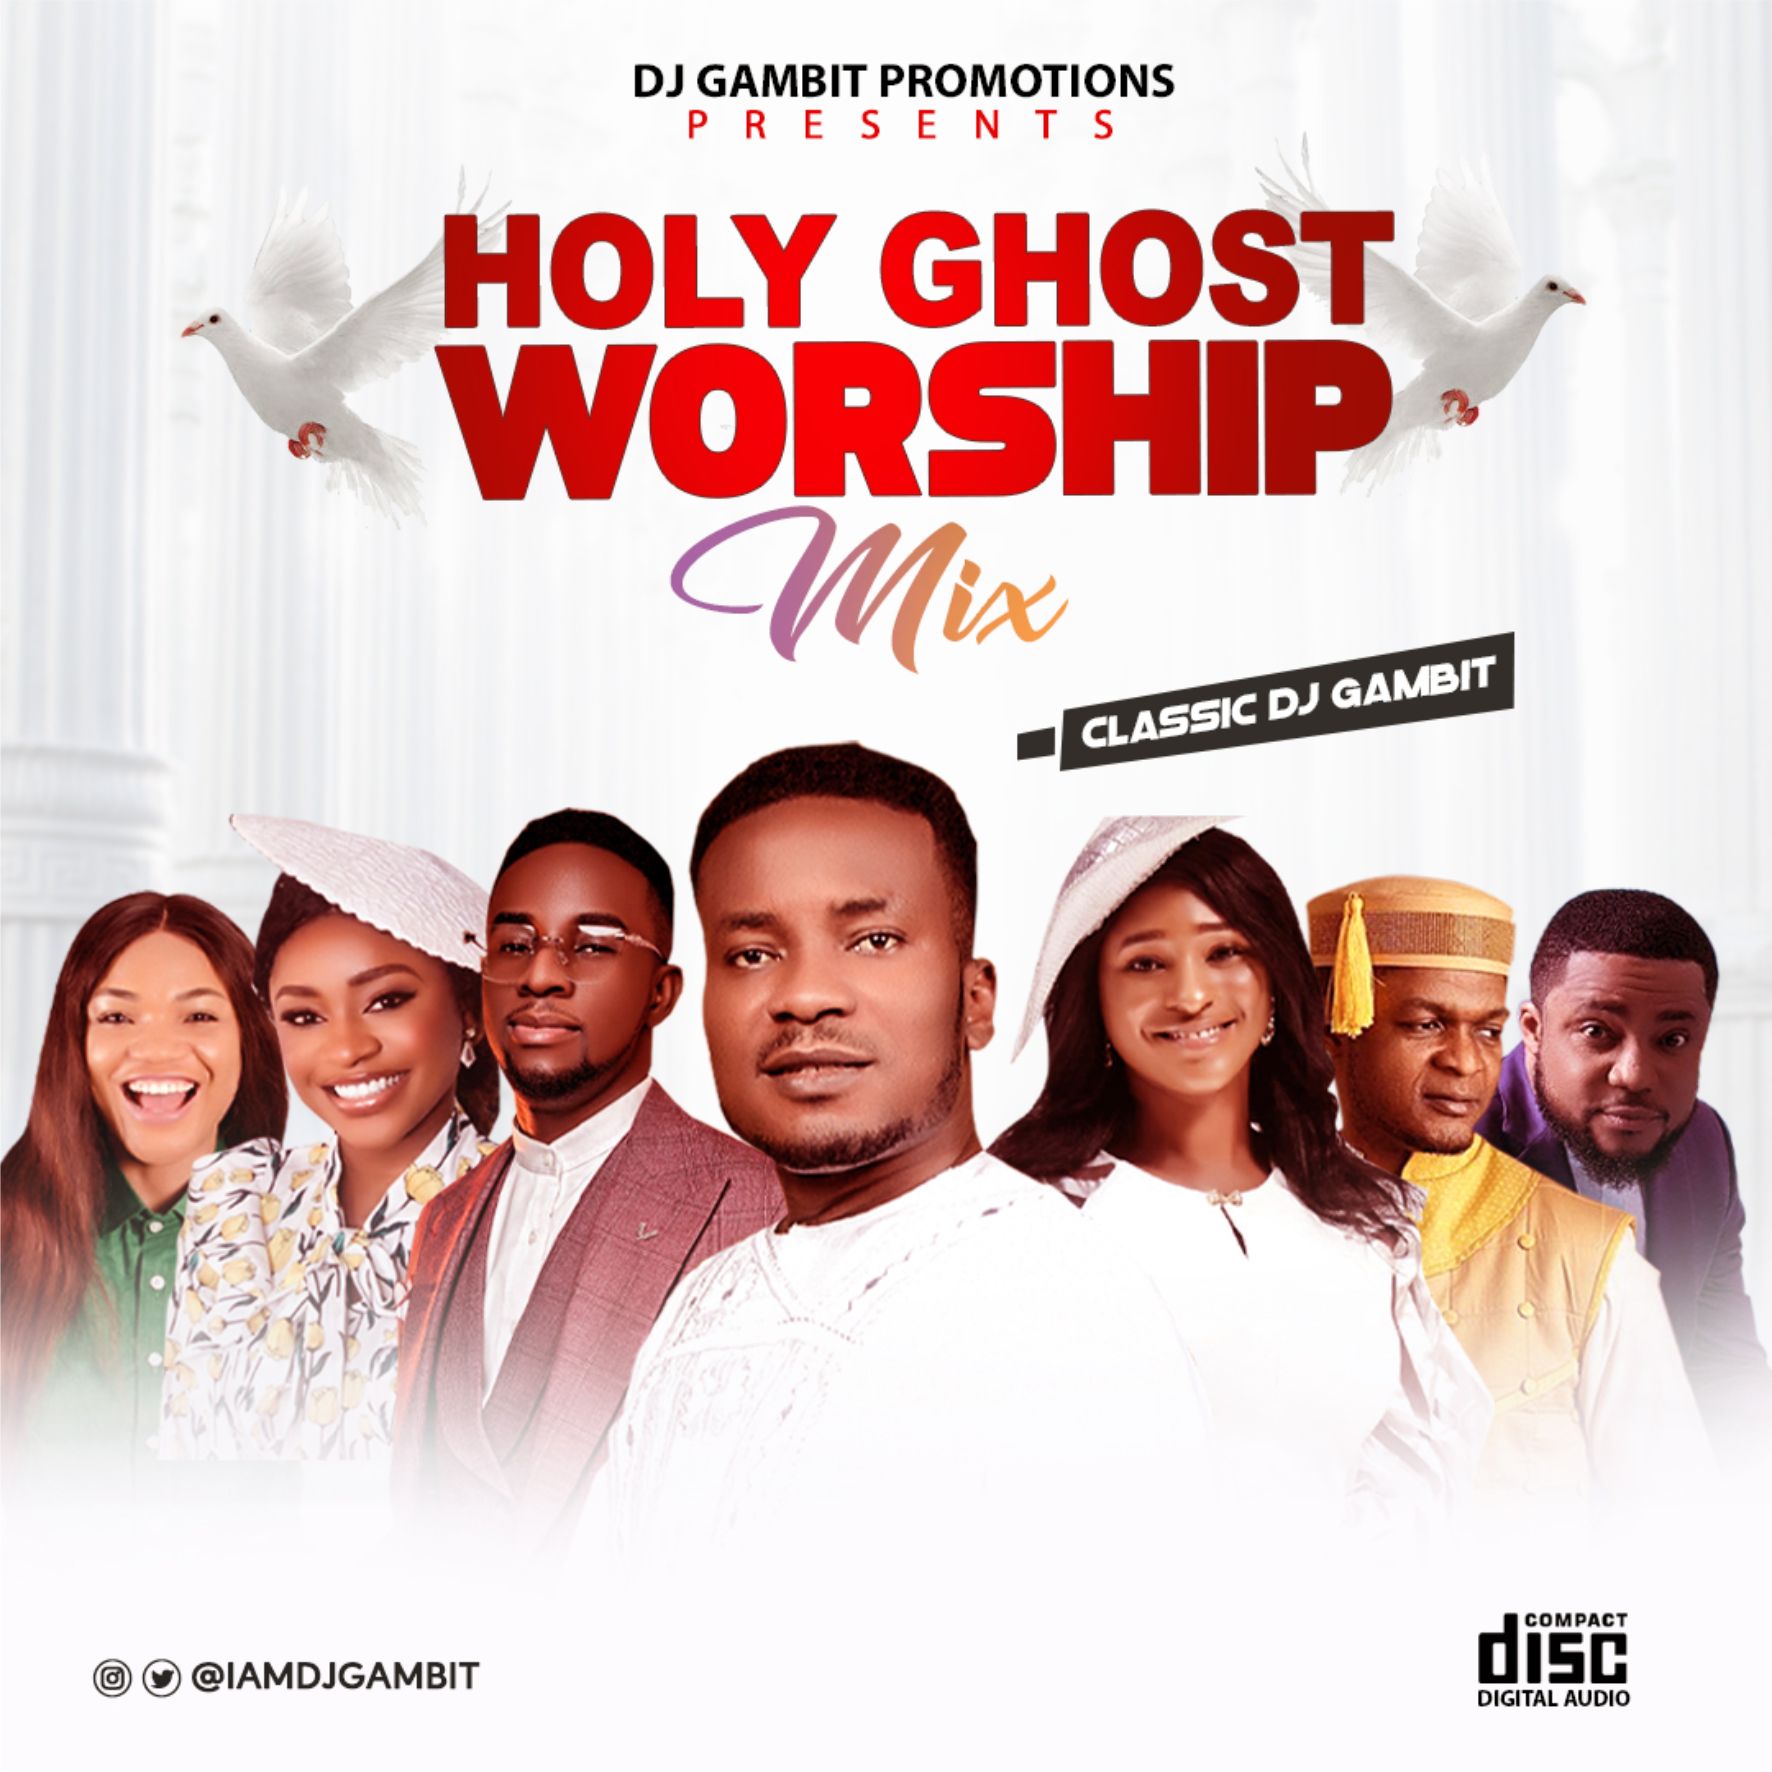 DJ Gambit dishes out a brand new gospel mix titled Holy Ghost Worship mix featuring Amos John